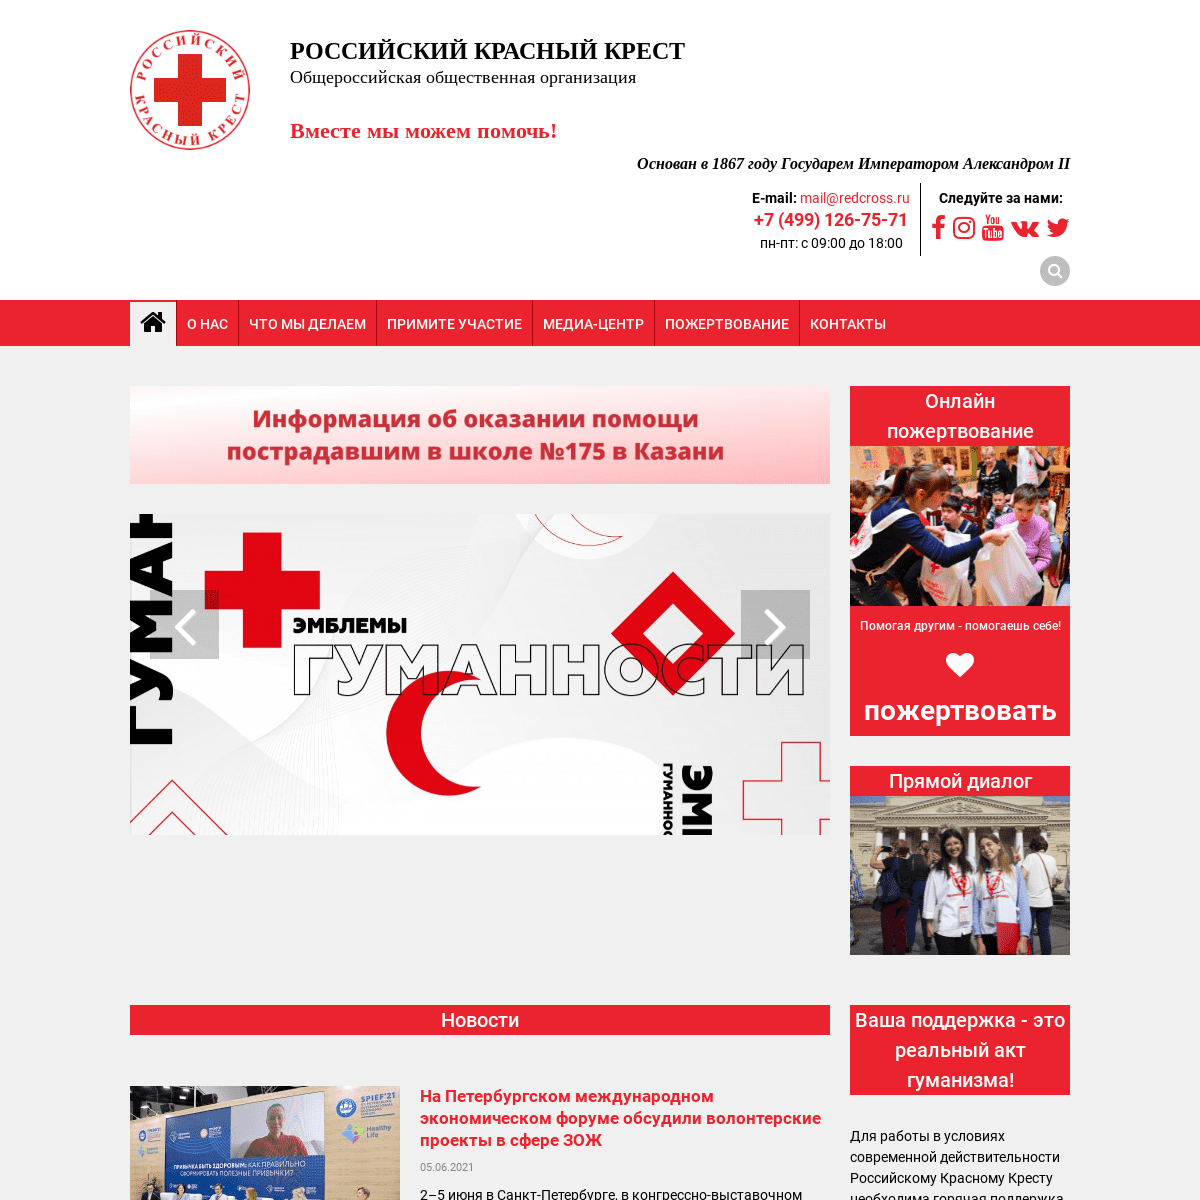 A complete backup of https://redcross.ru